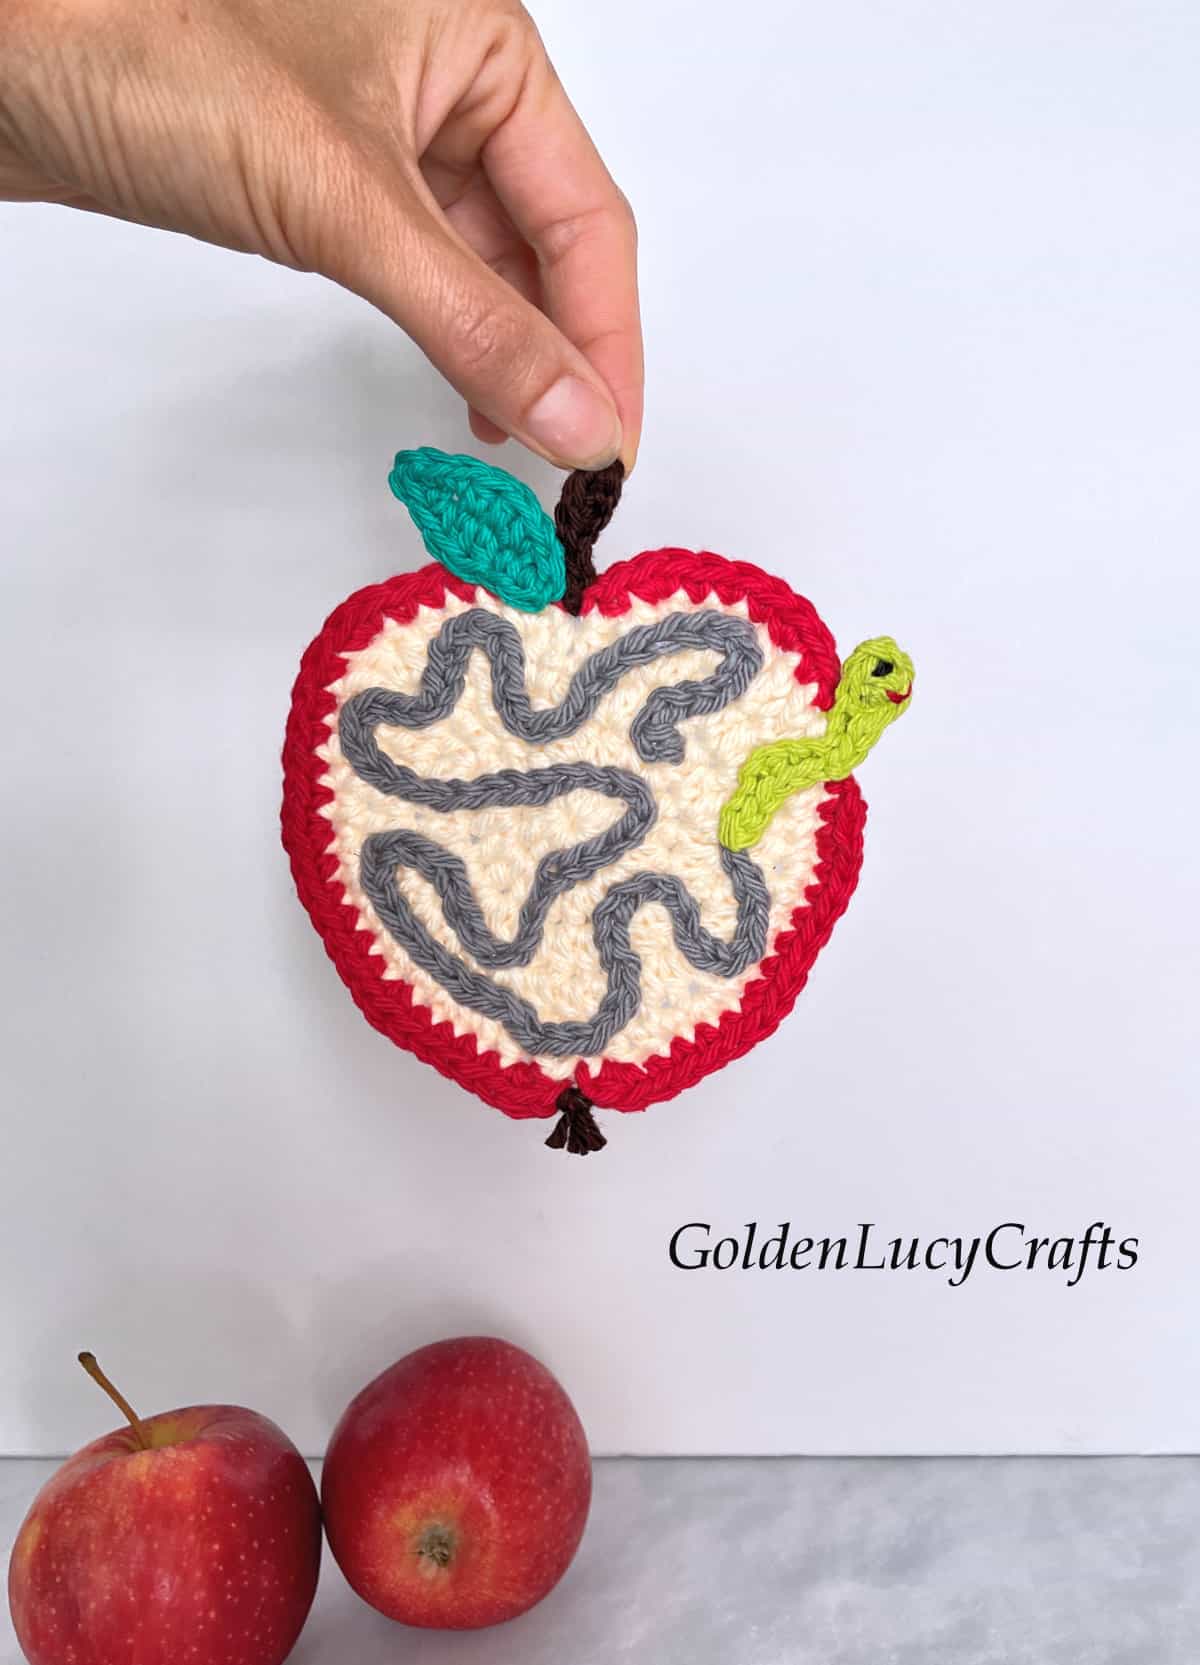 Crochet apple with worm coaster held by fingertips.